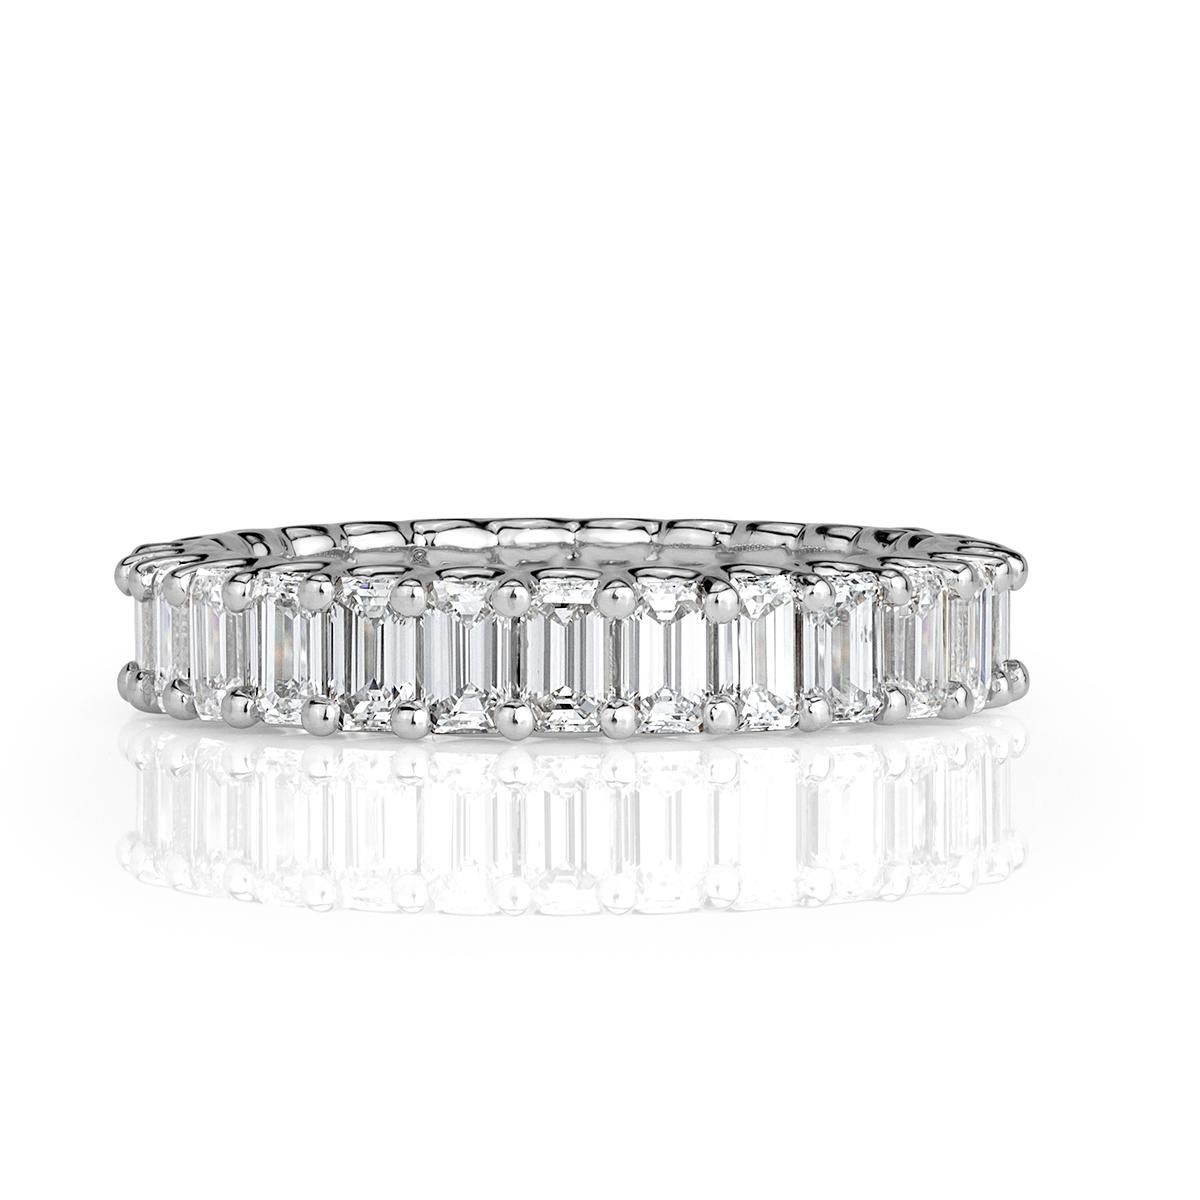 Mark Broumand 3.15 Carat Emerald Cut Diamond Eternity Band in Platinum In New Condition For Sale In Los Angeles, CA